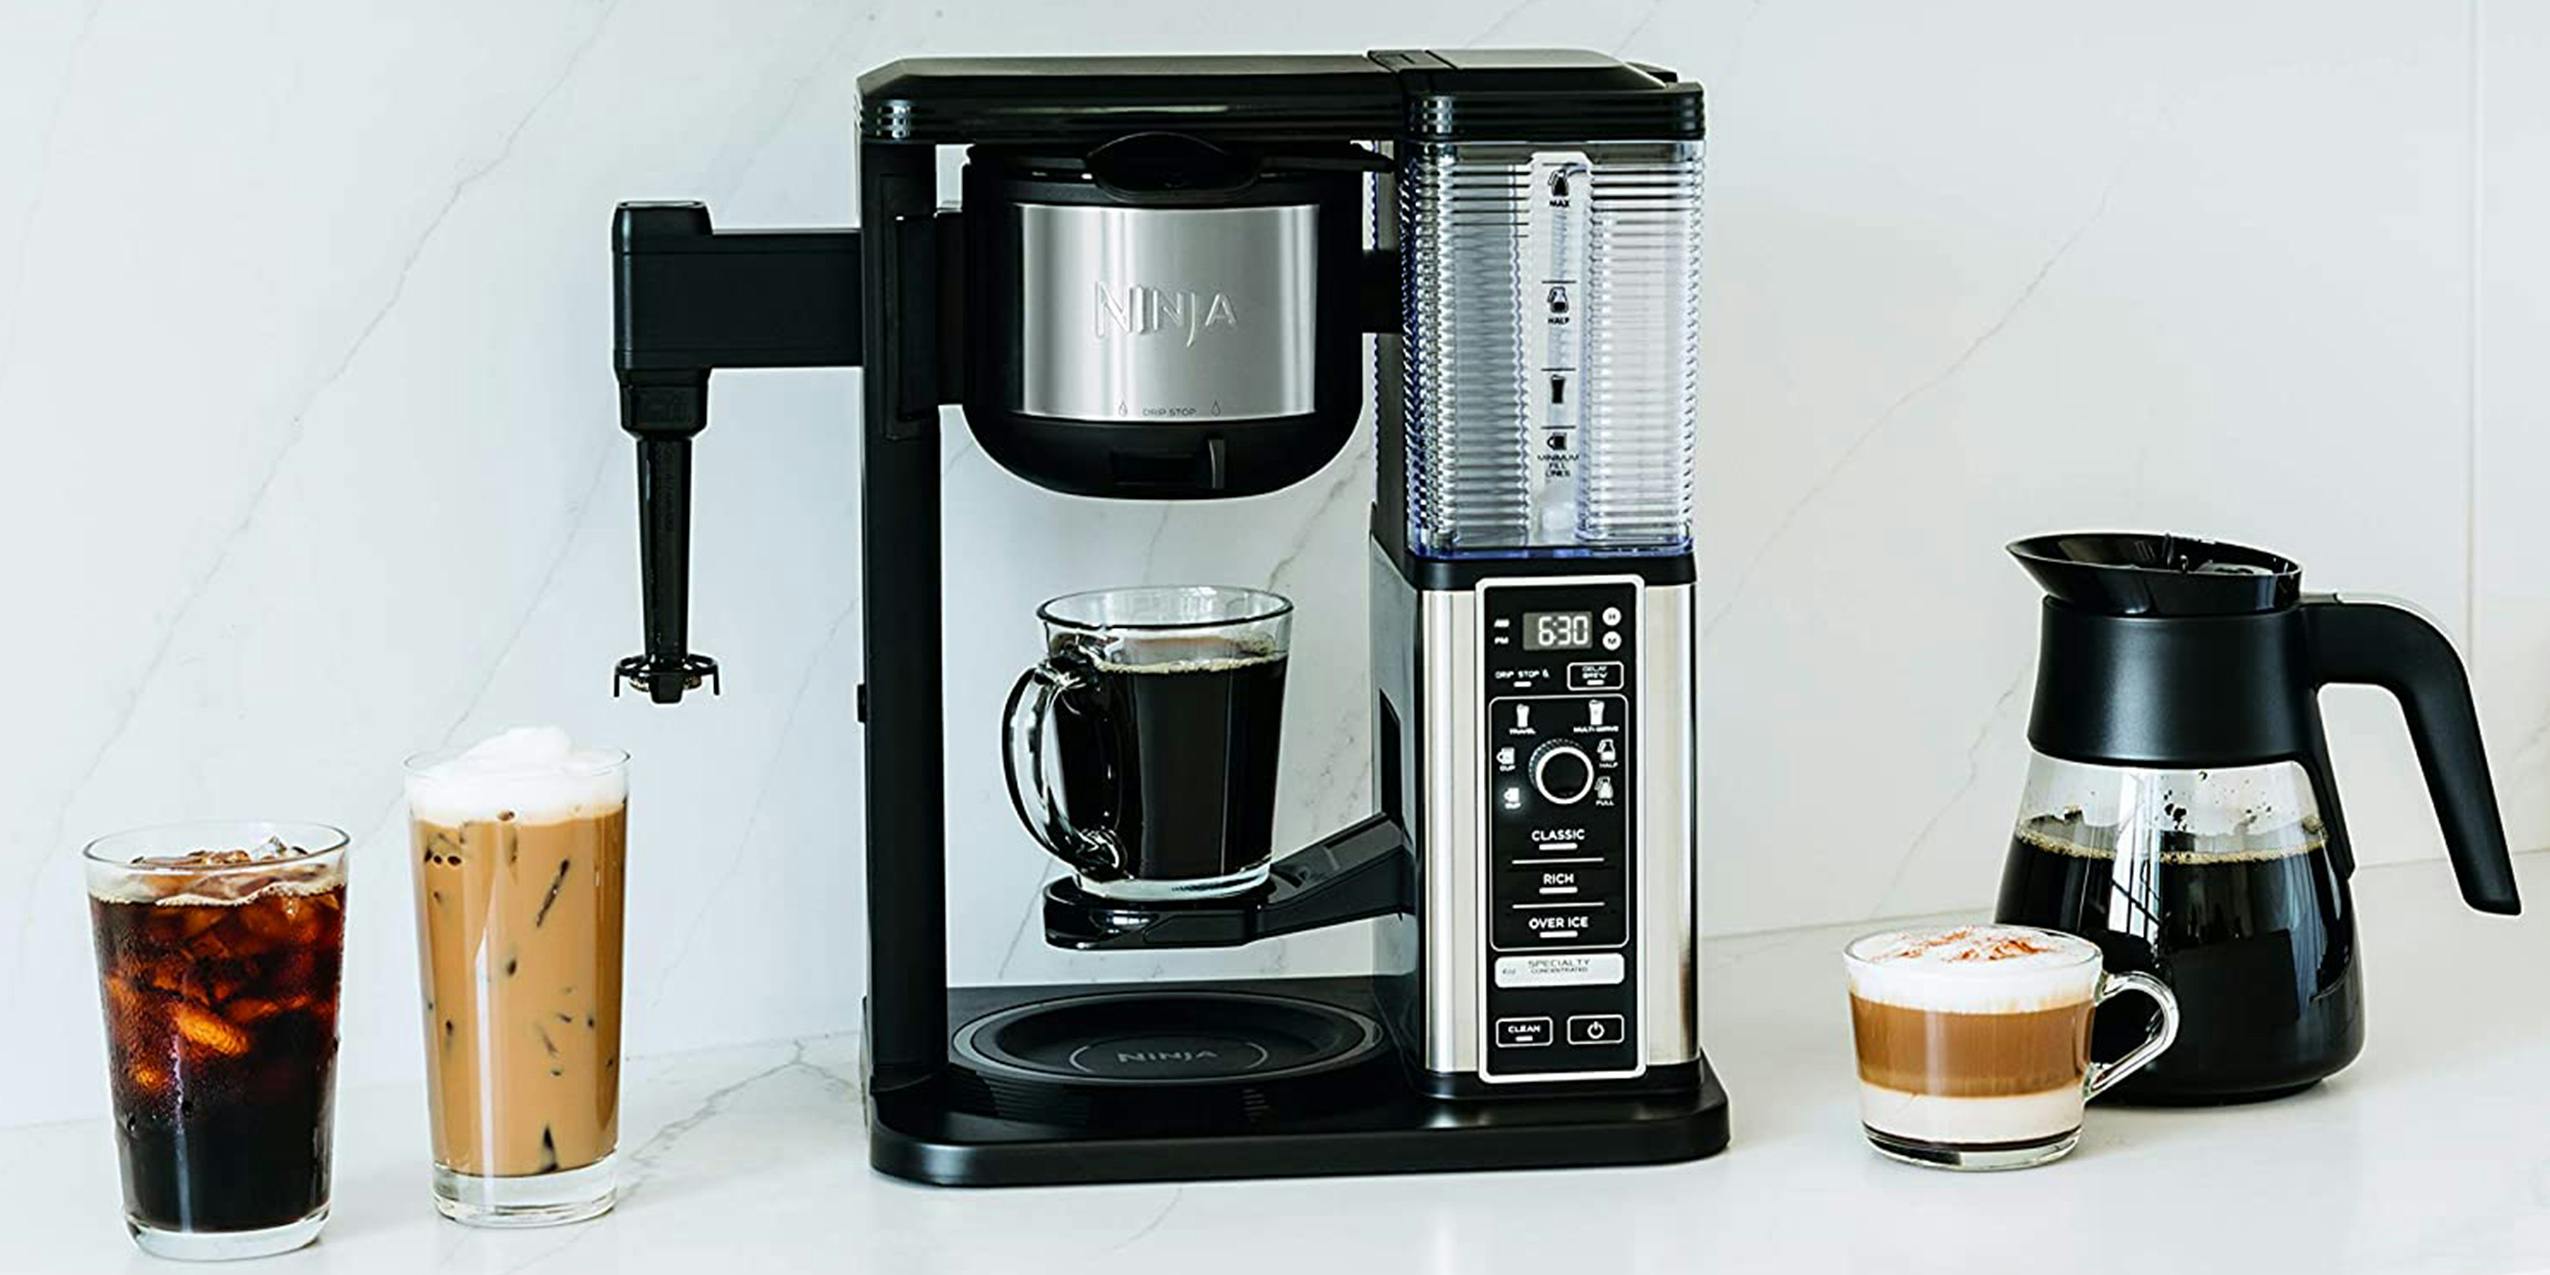 Ninja Coffee Maker along with a few of the drinks the device can make.